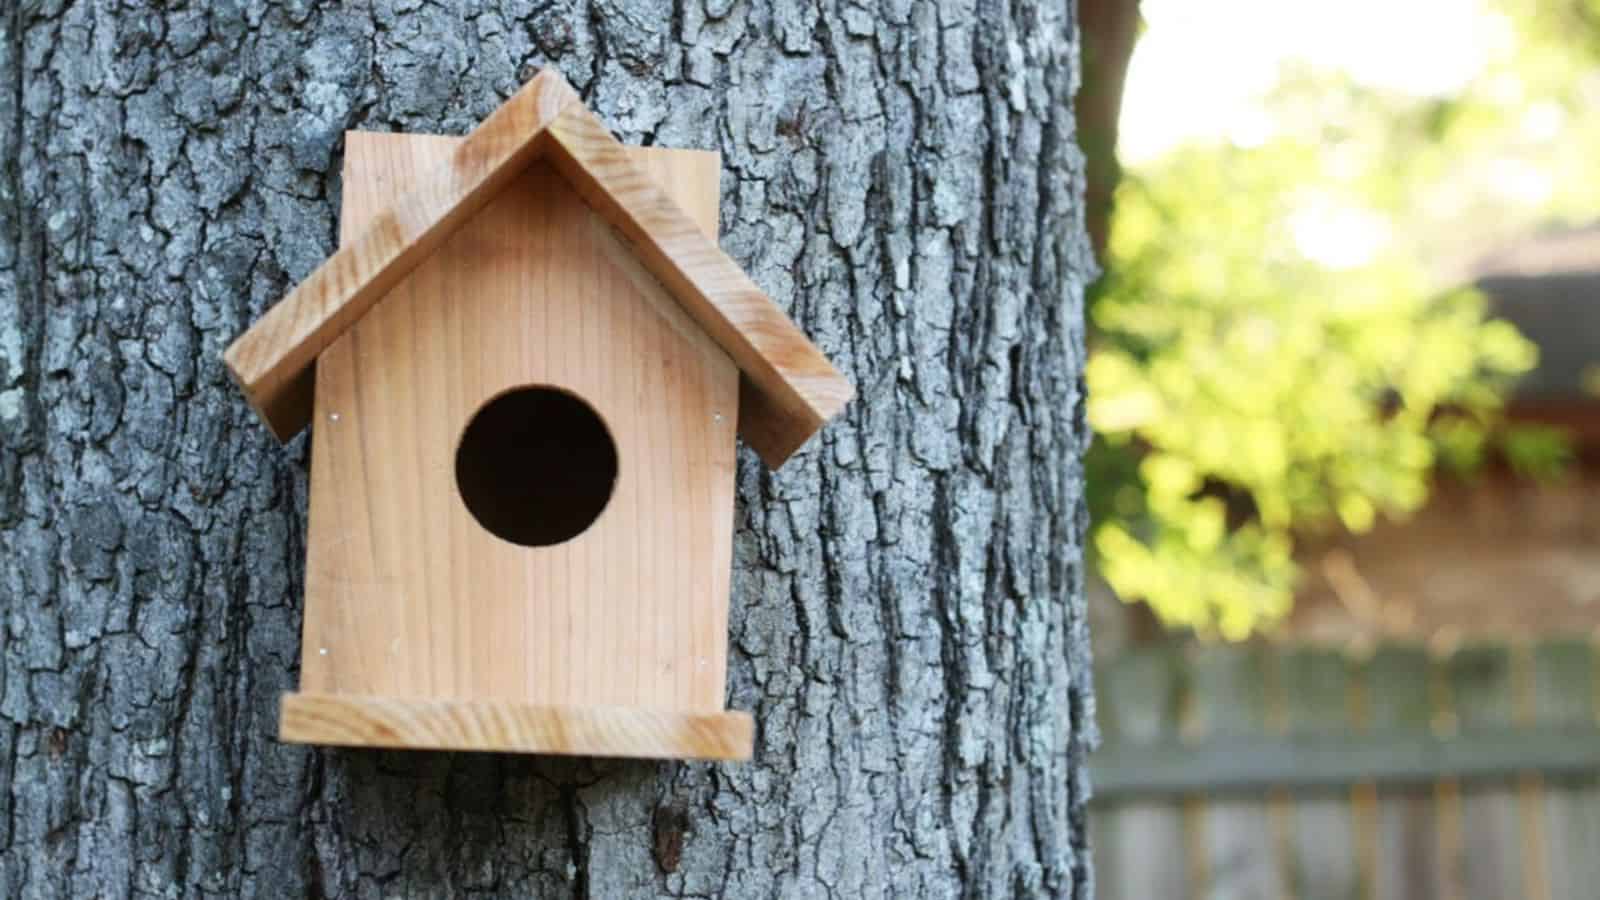 <p>A birdhouse is a great project for kids to build! The design is straightforward, and they can make it using wood glue and nails. Cedar fence pickets are the perfect outdoor material for resisting insects and the weather. <a href="https://www.ana-white.com/woodworking-projects/diy-birdhouse-one-cedar-fence-picket" rel="noreferrer noopener">Get the plans here.</a></p>